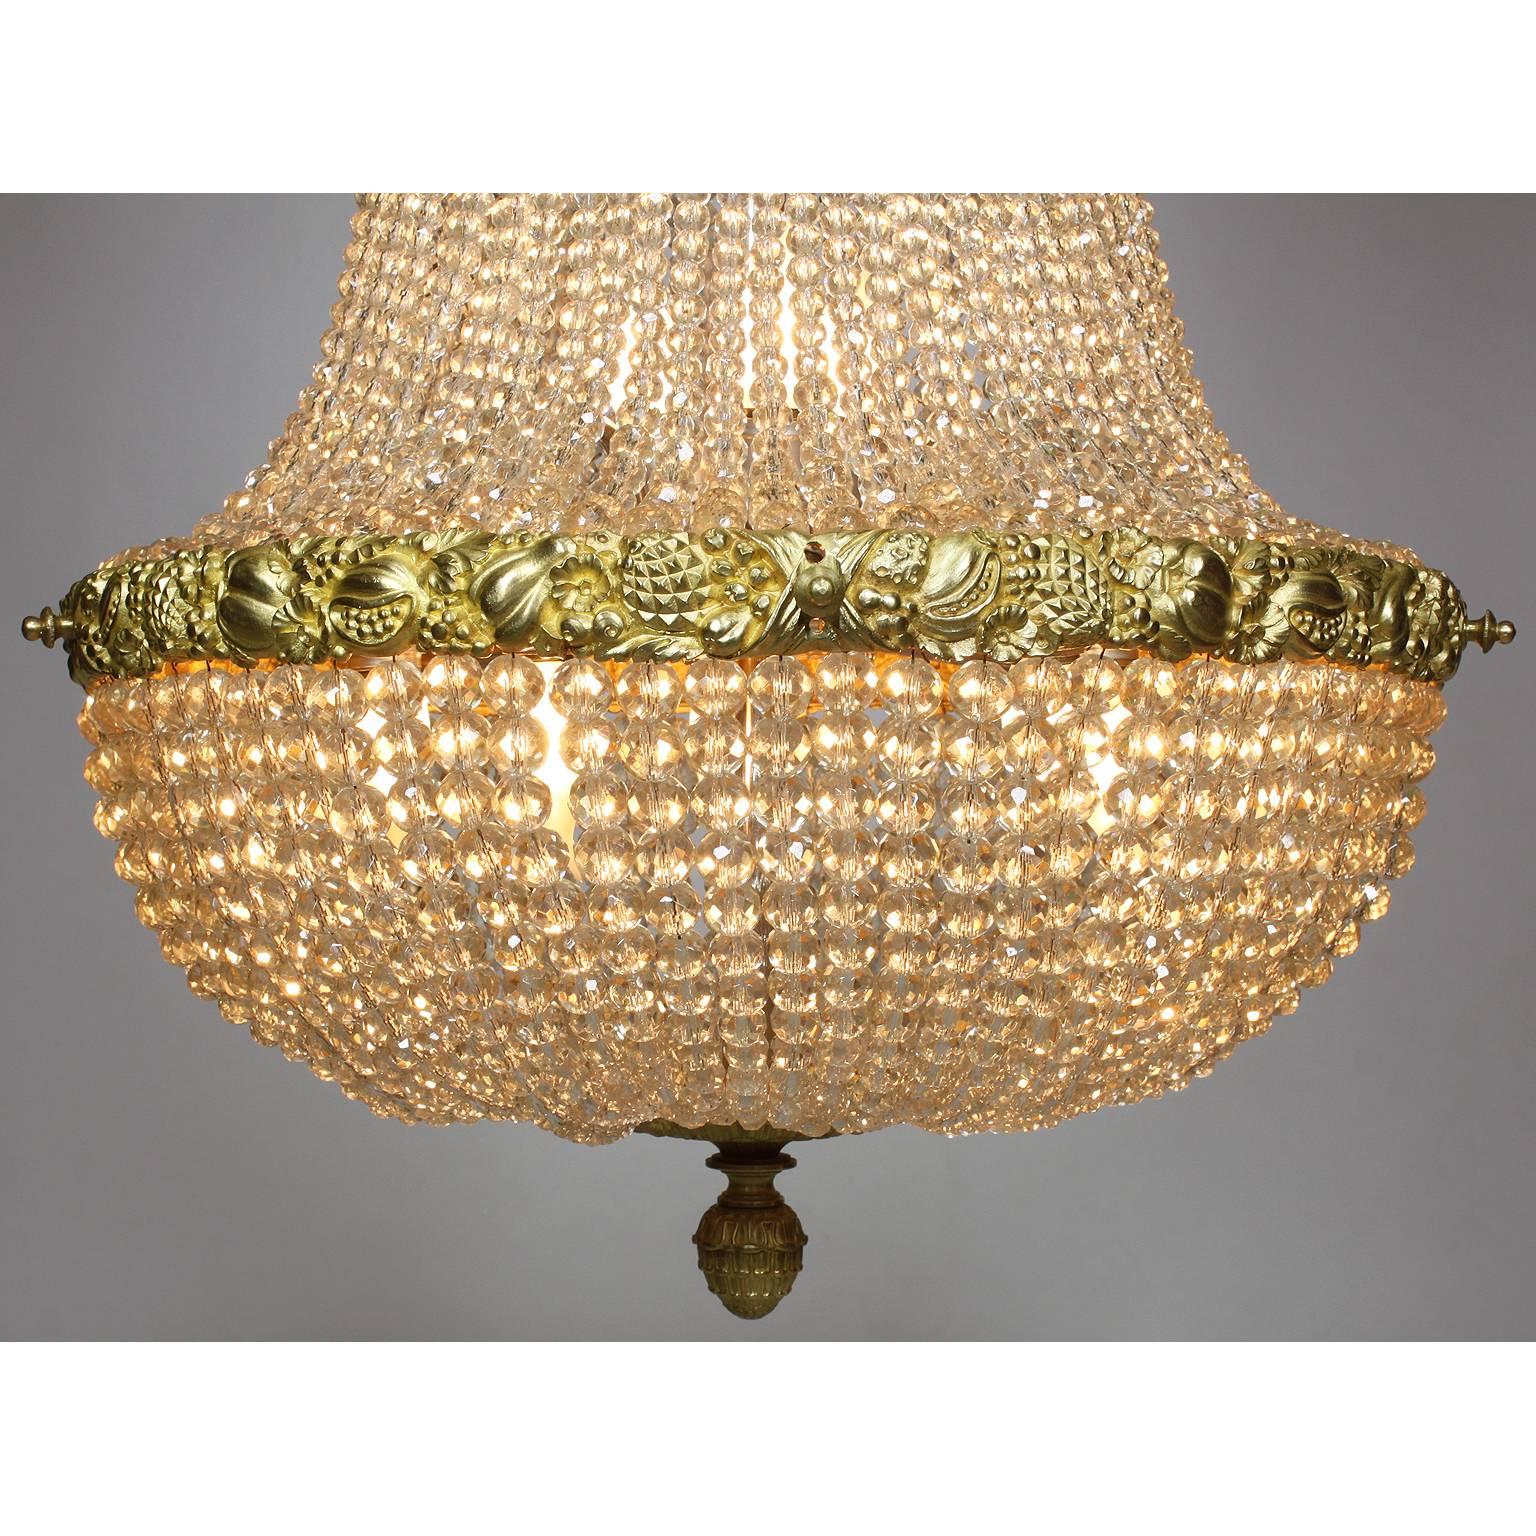 A Fine French 19th-20th Century Louis XVI Style Gilt-Bronze and Beaded Cut-Glass Basket Style Eight-Light Chandelier with a Floral and Fruits Center Rim and a Floral Canopy. Circa: Paris, 1900.

Height: 42 inches (106.7 cm)
Width: 23 1/2 inches